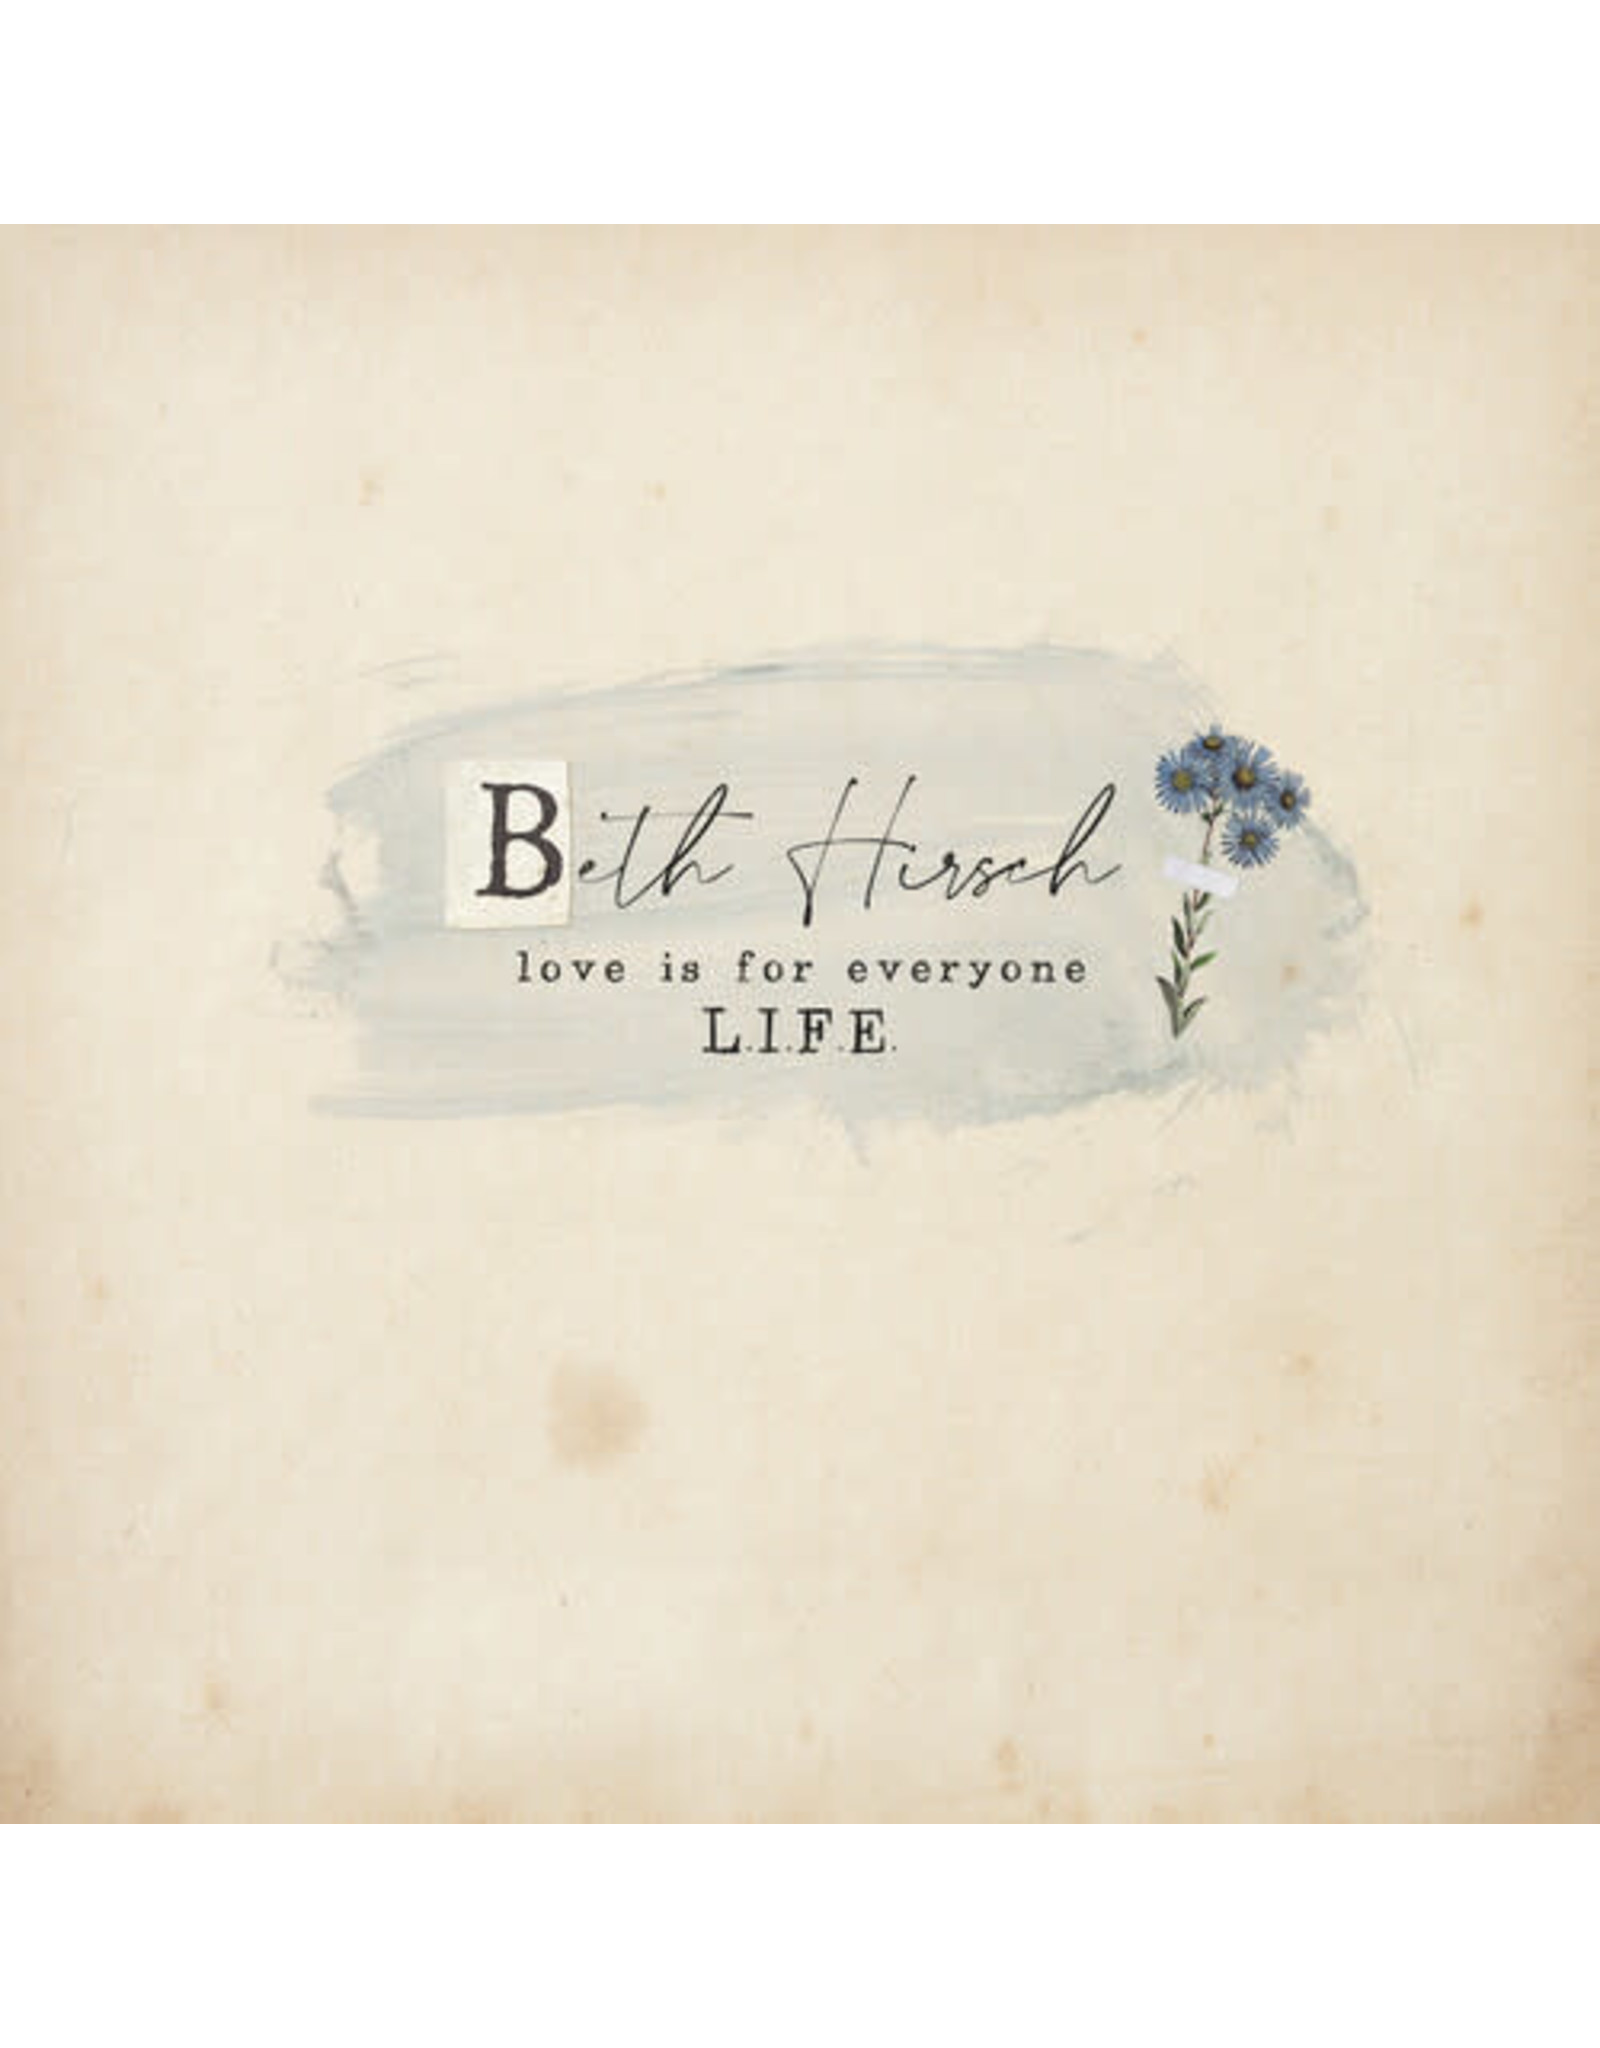 New Vinyl Beth Hirsch - Love Is For Everyone: LIFE 2.0 LP